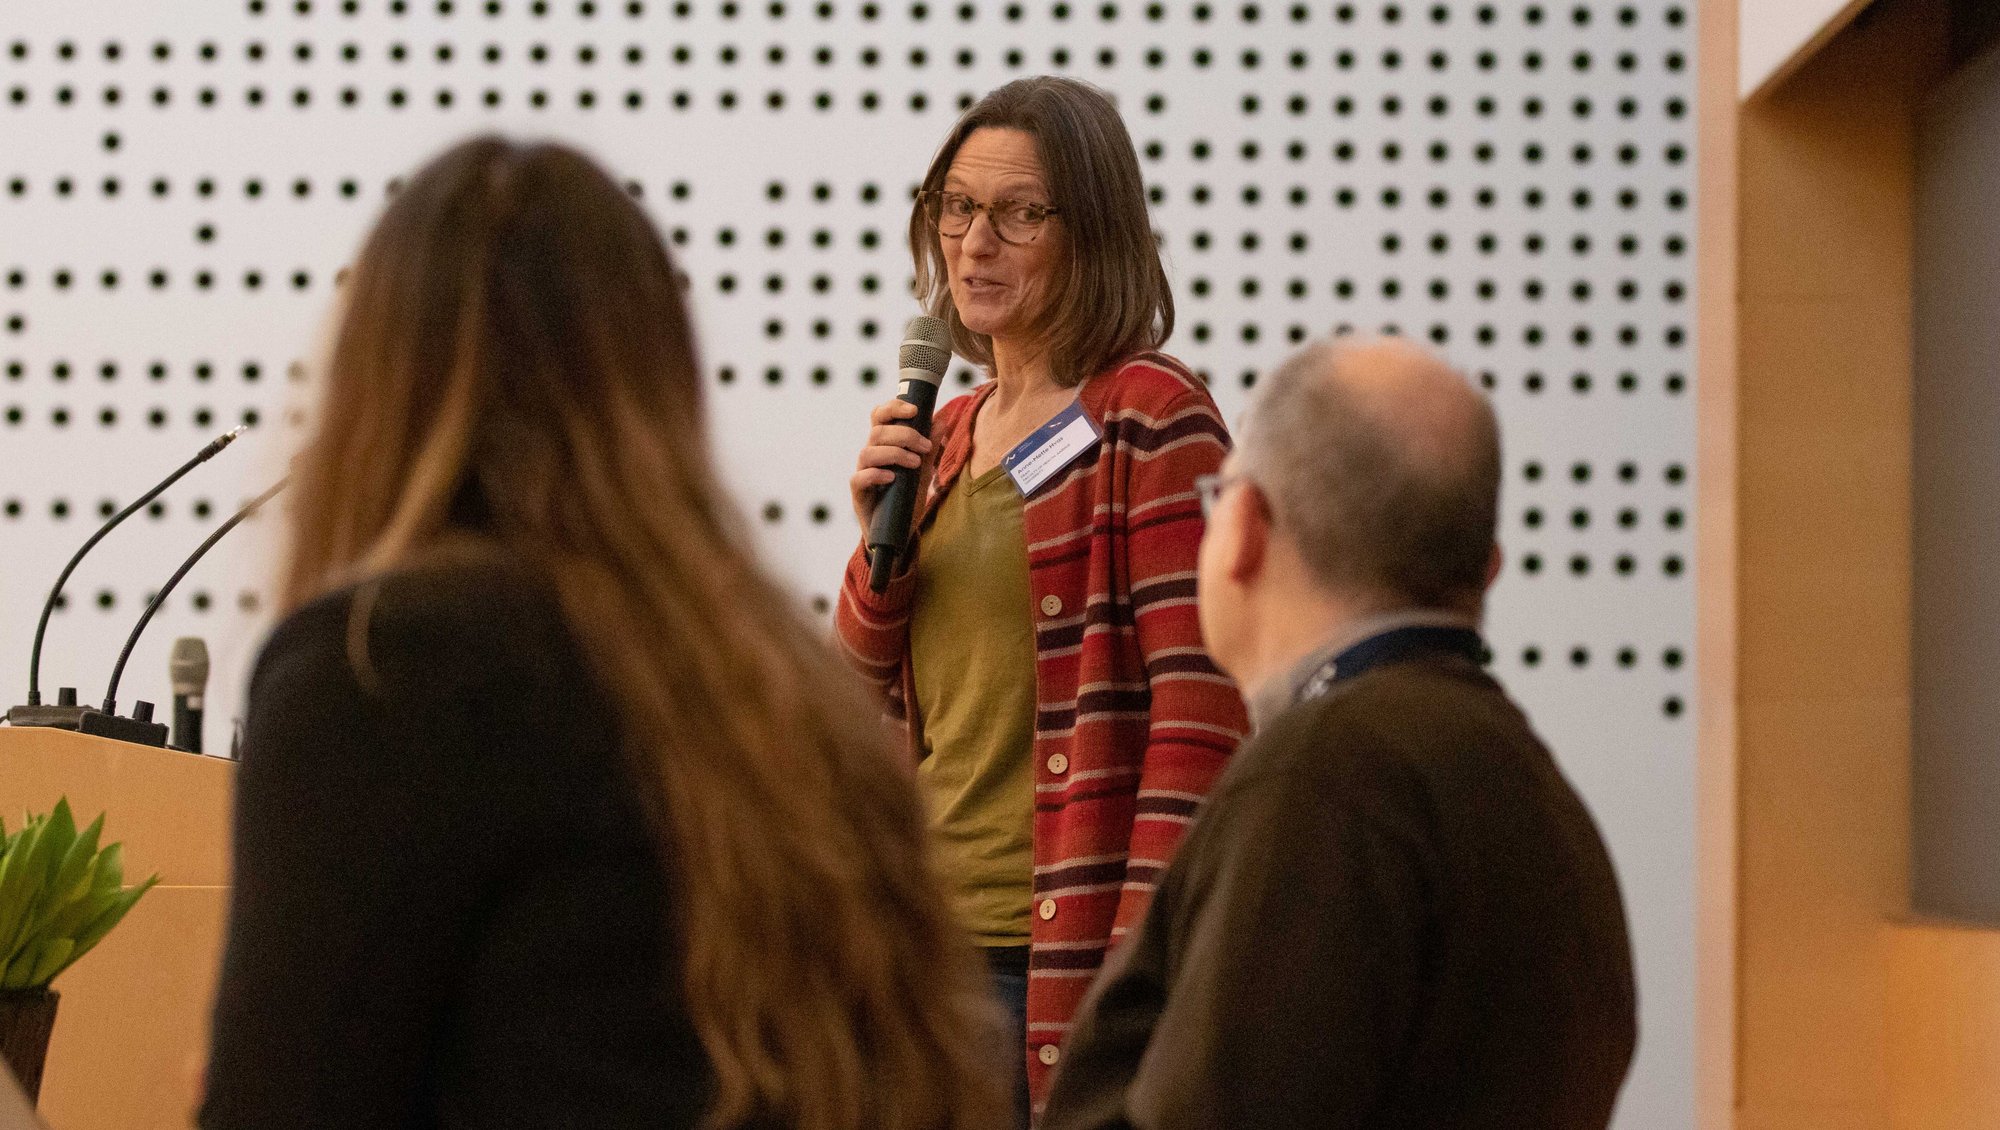 The Dean of Health, Anne-Mette Hvas, took the stage to hold a thank you speech for Søren K. Moestrup, praising him for his great work with the Fogh-Nielsen competition through 15 years. Photo: Simon Fischel, AU Health.